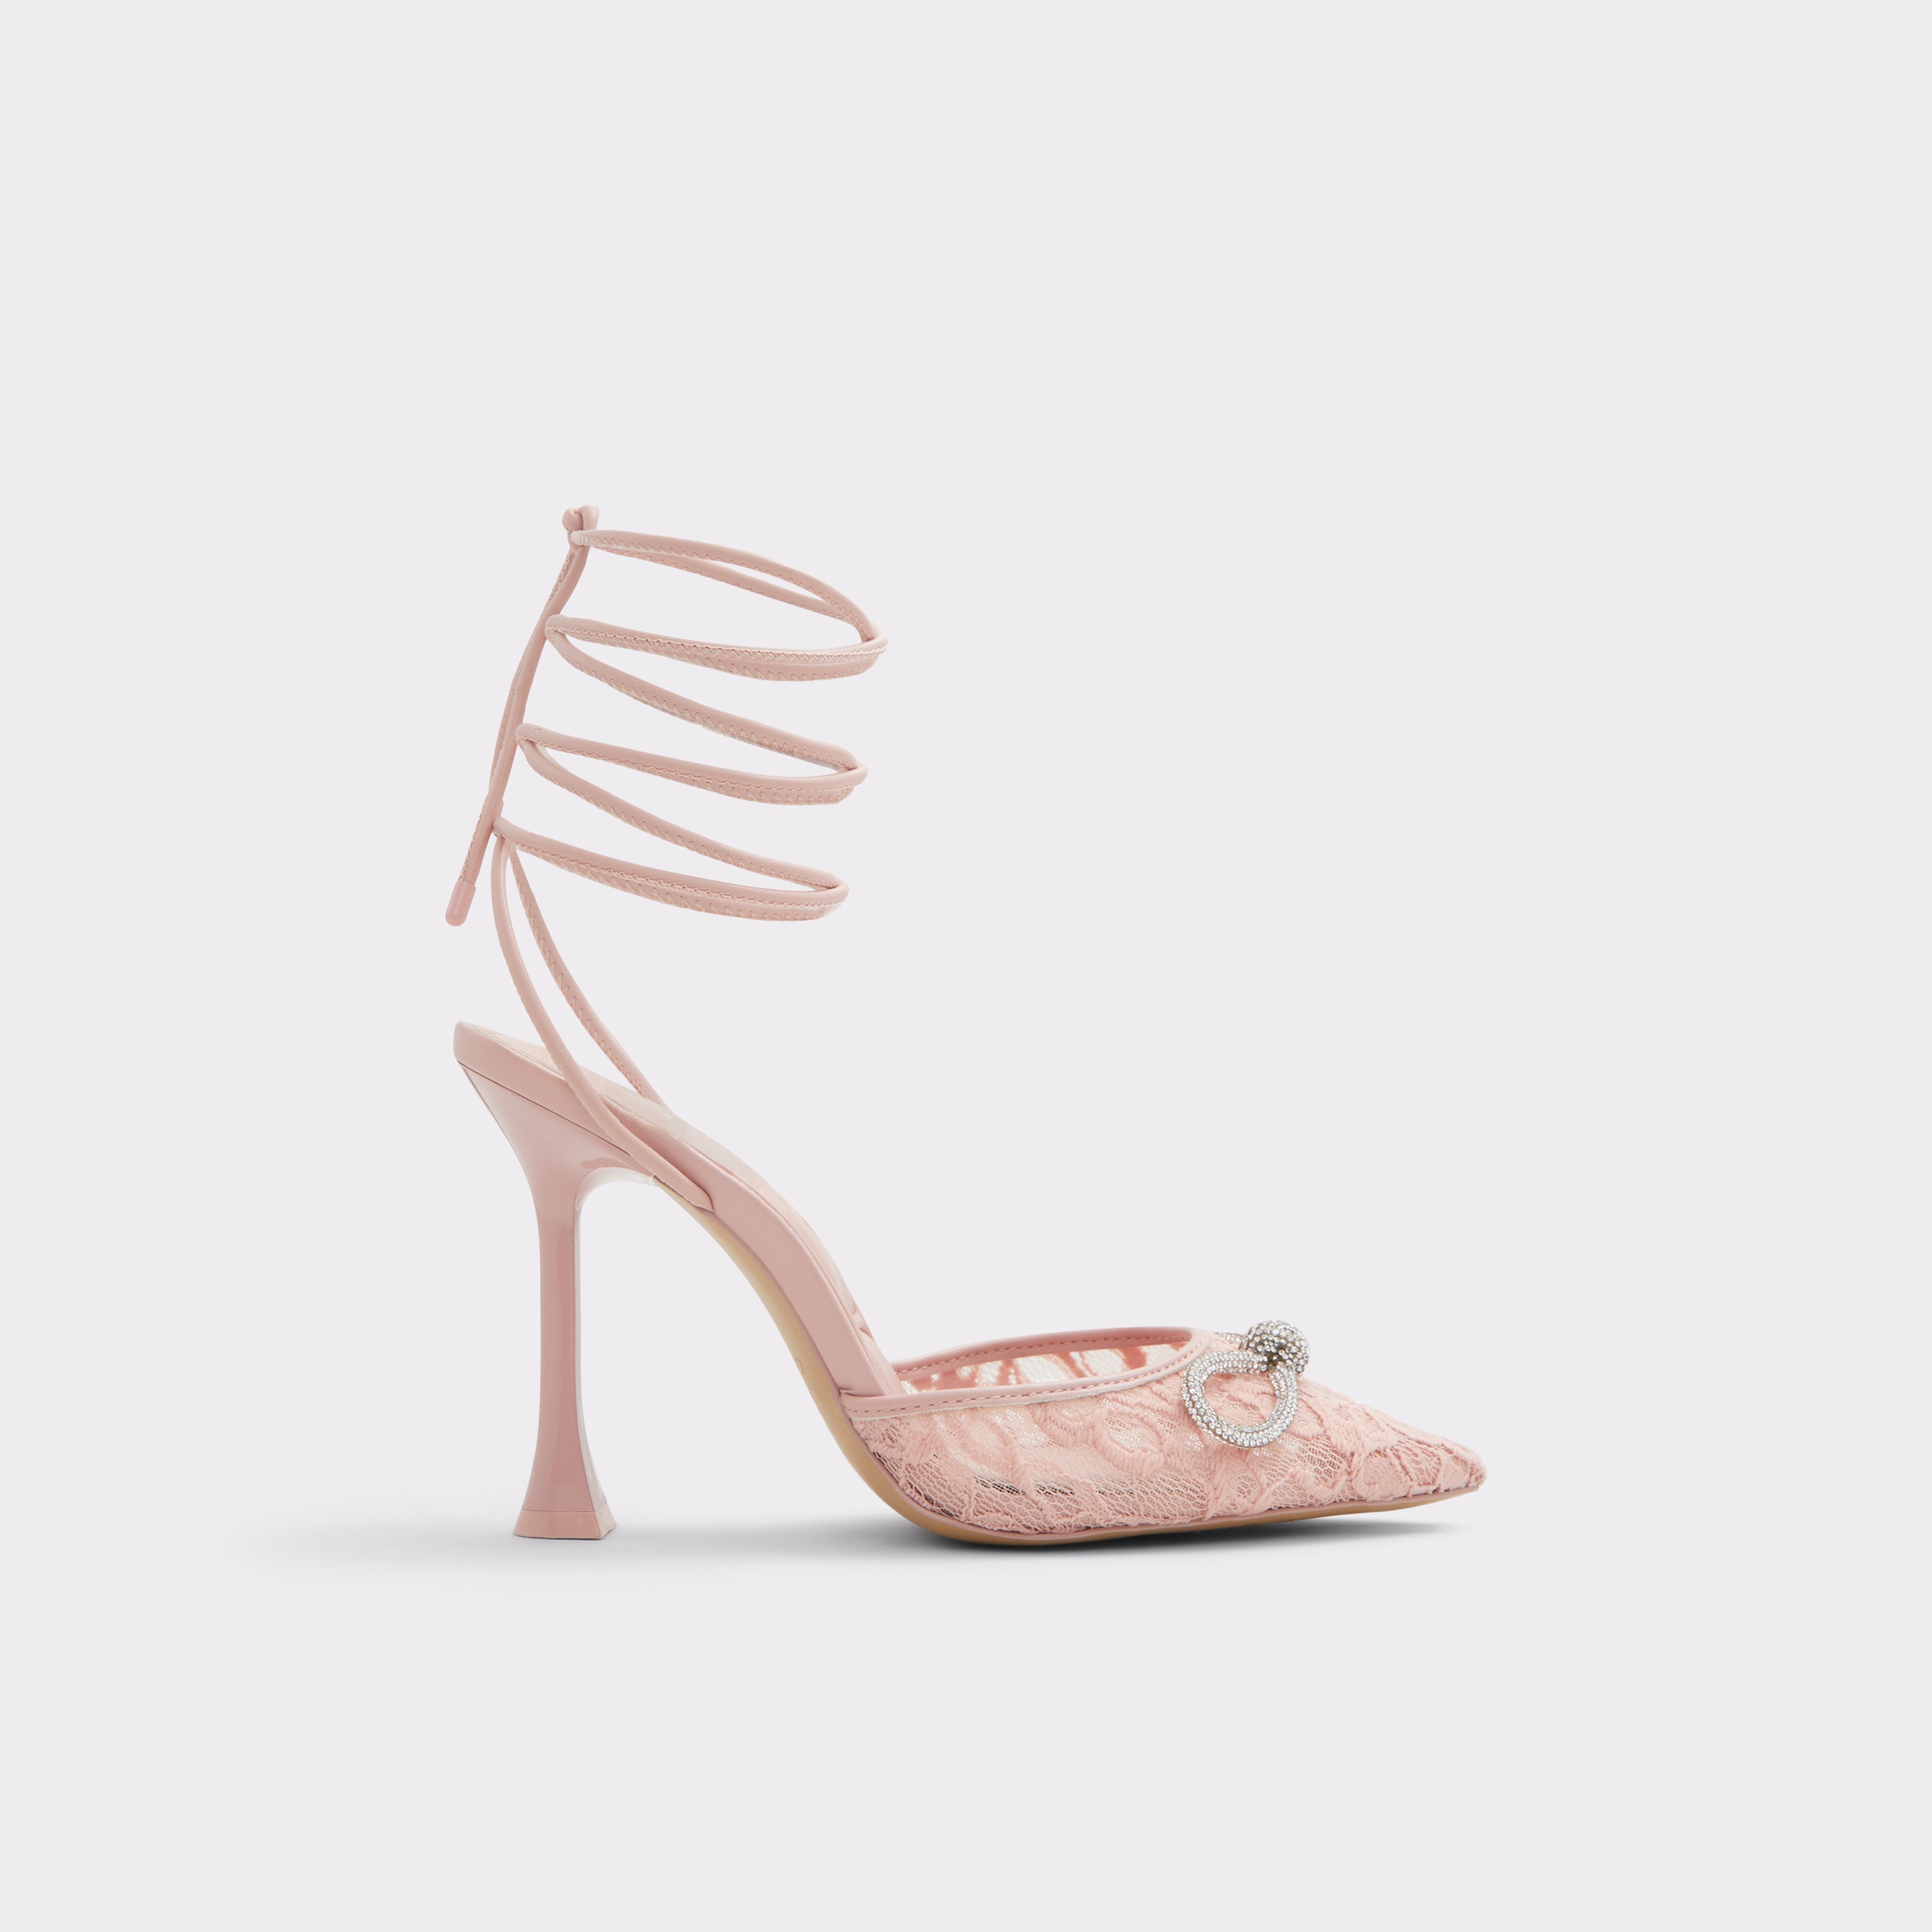 ALDO MESH BOW DETAIL LACE-UP HEELED PUMP IN PINK